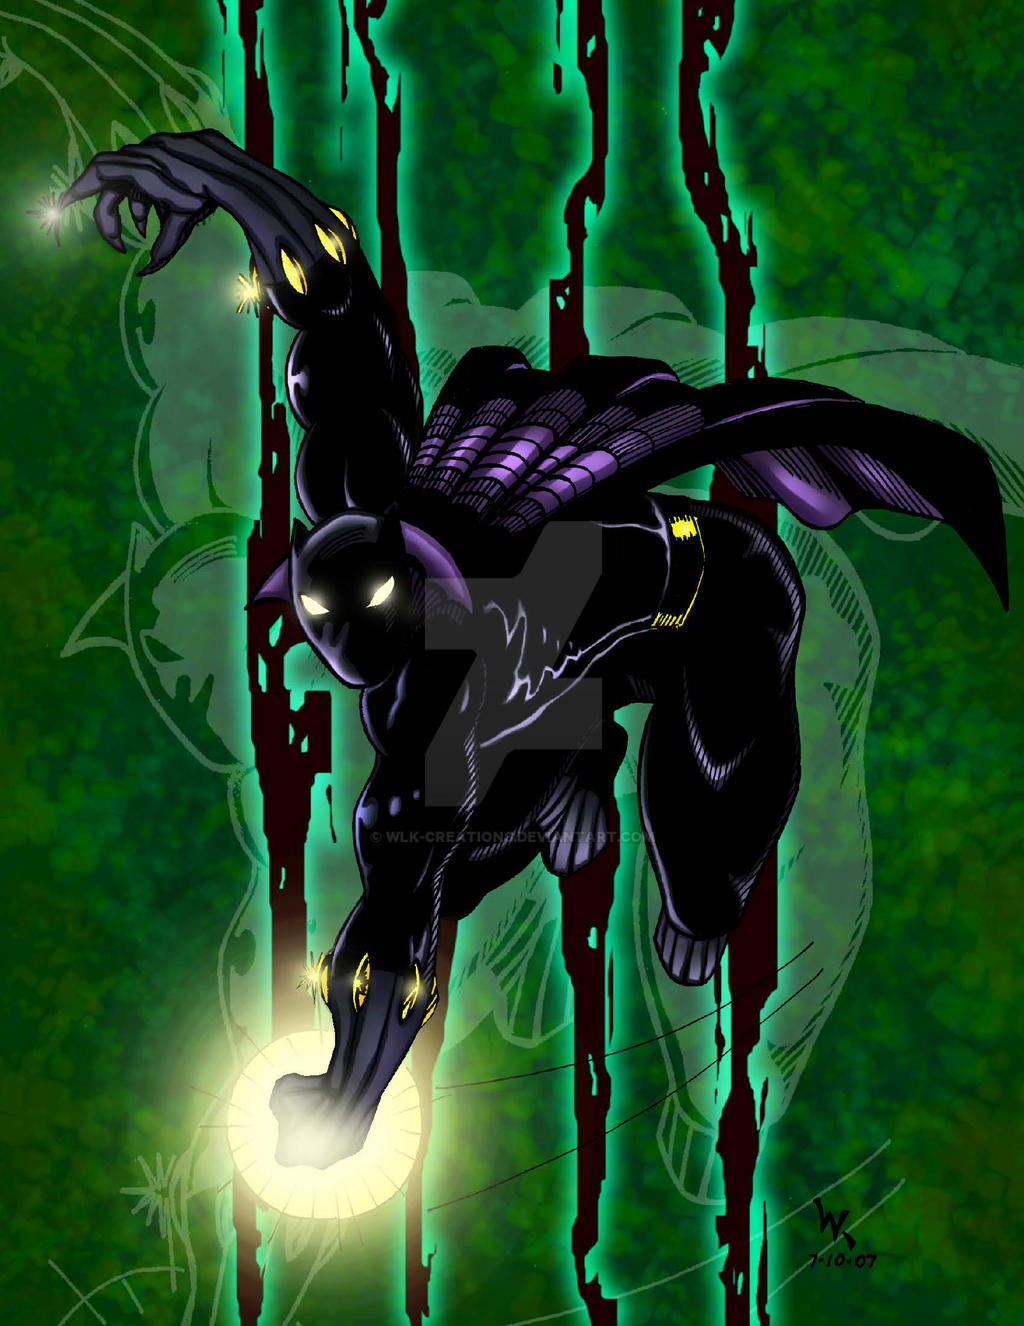 Black Panther In Color By Wlk Creations On Deviantart 